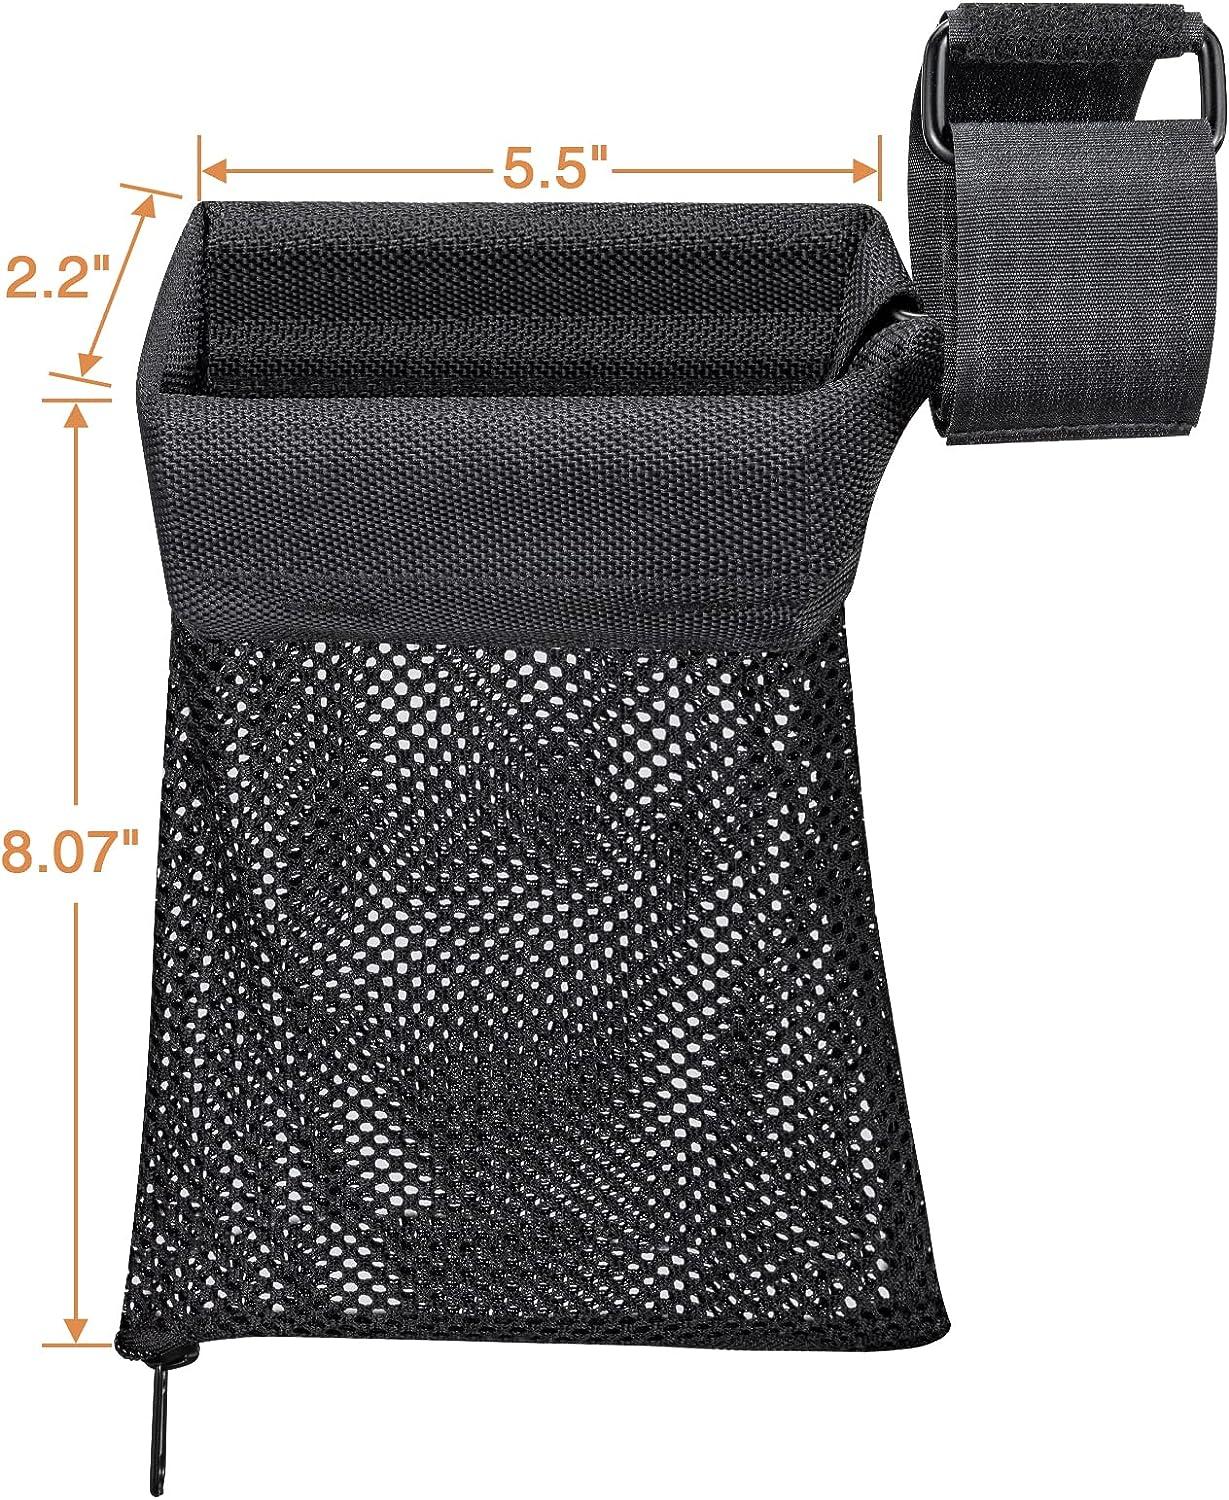  Brass Catcher Tactical Deluxe Mesh Brass Shell Catcher with  Zippered Bottom for Quick Unload : Sports & Outdoors